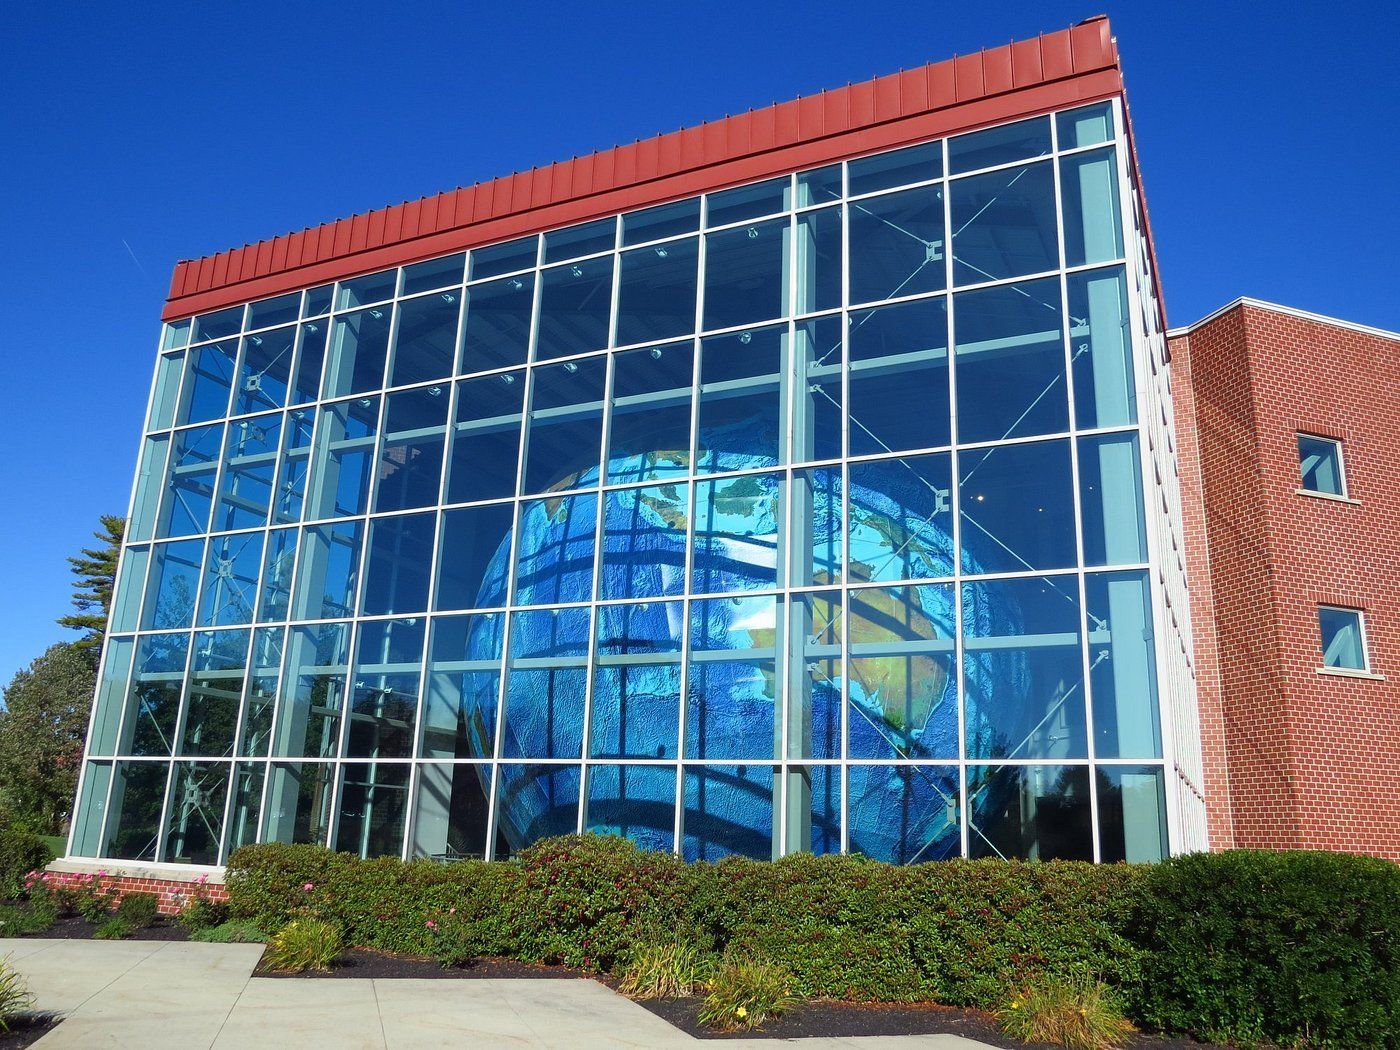 World's Largest Rotating and Revolving Globe, world record in Yarmouth, Maine
